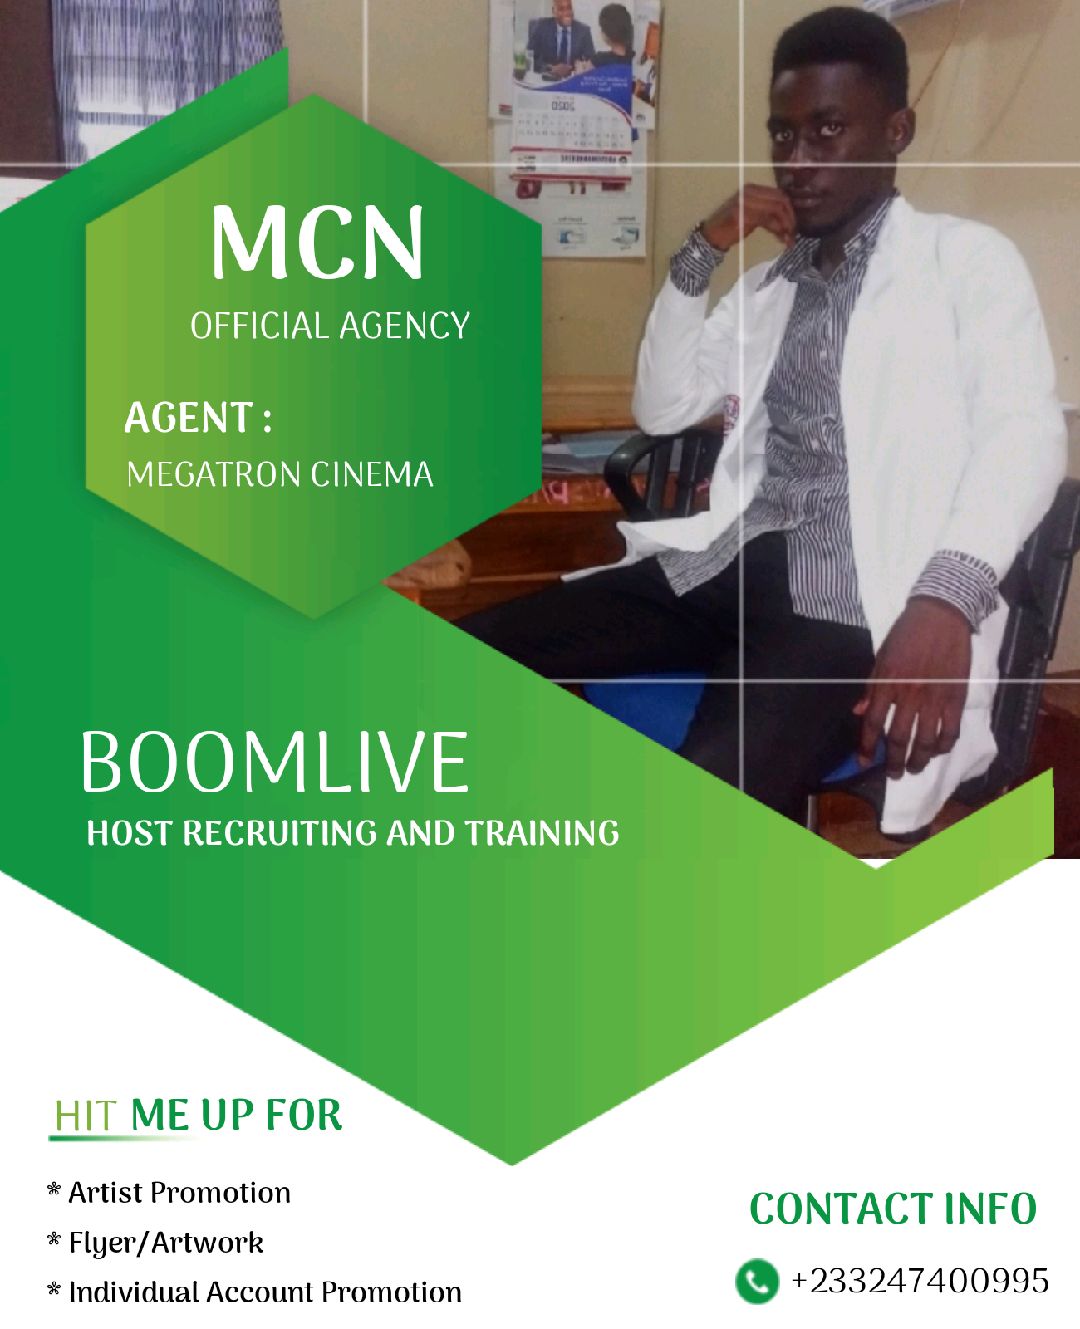 BOOMLIVE HOST RECRUITING AND TRAINING